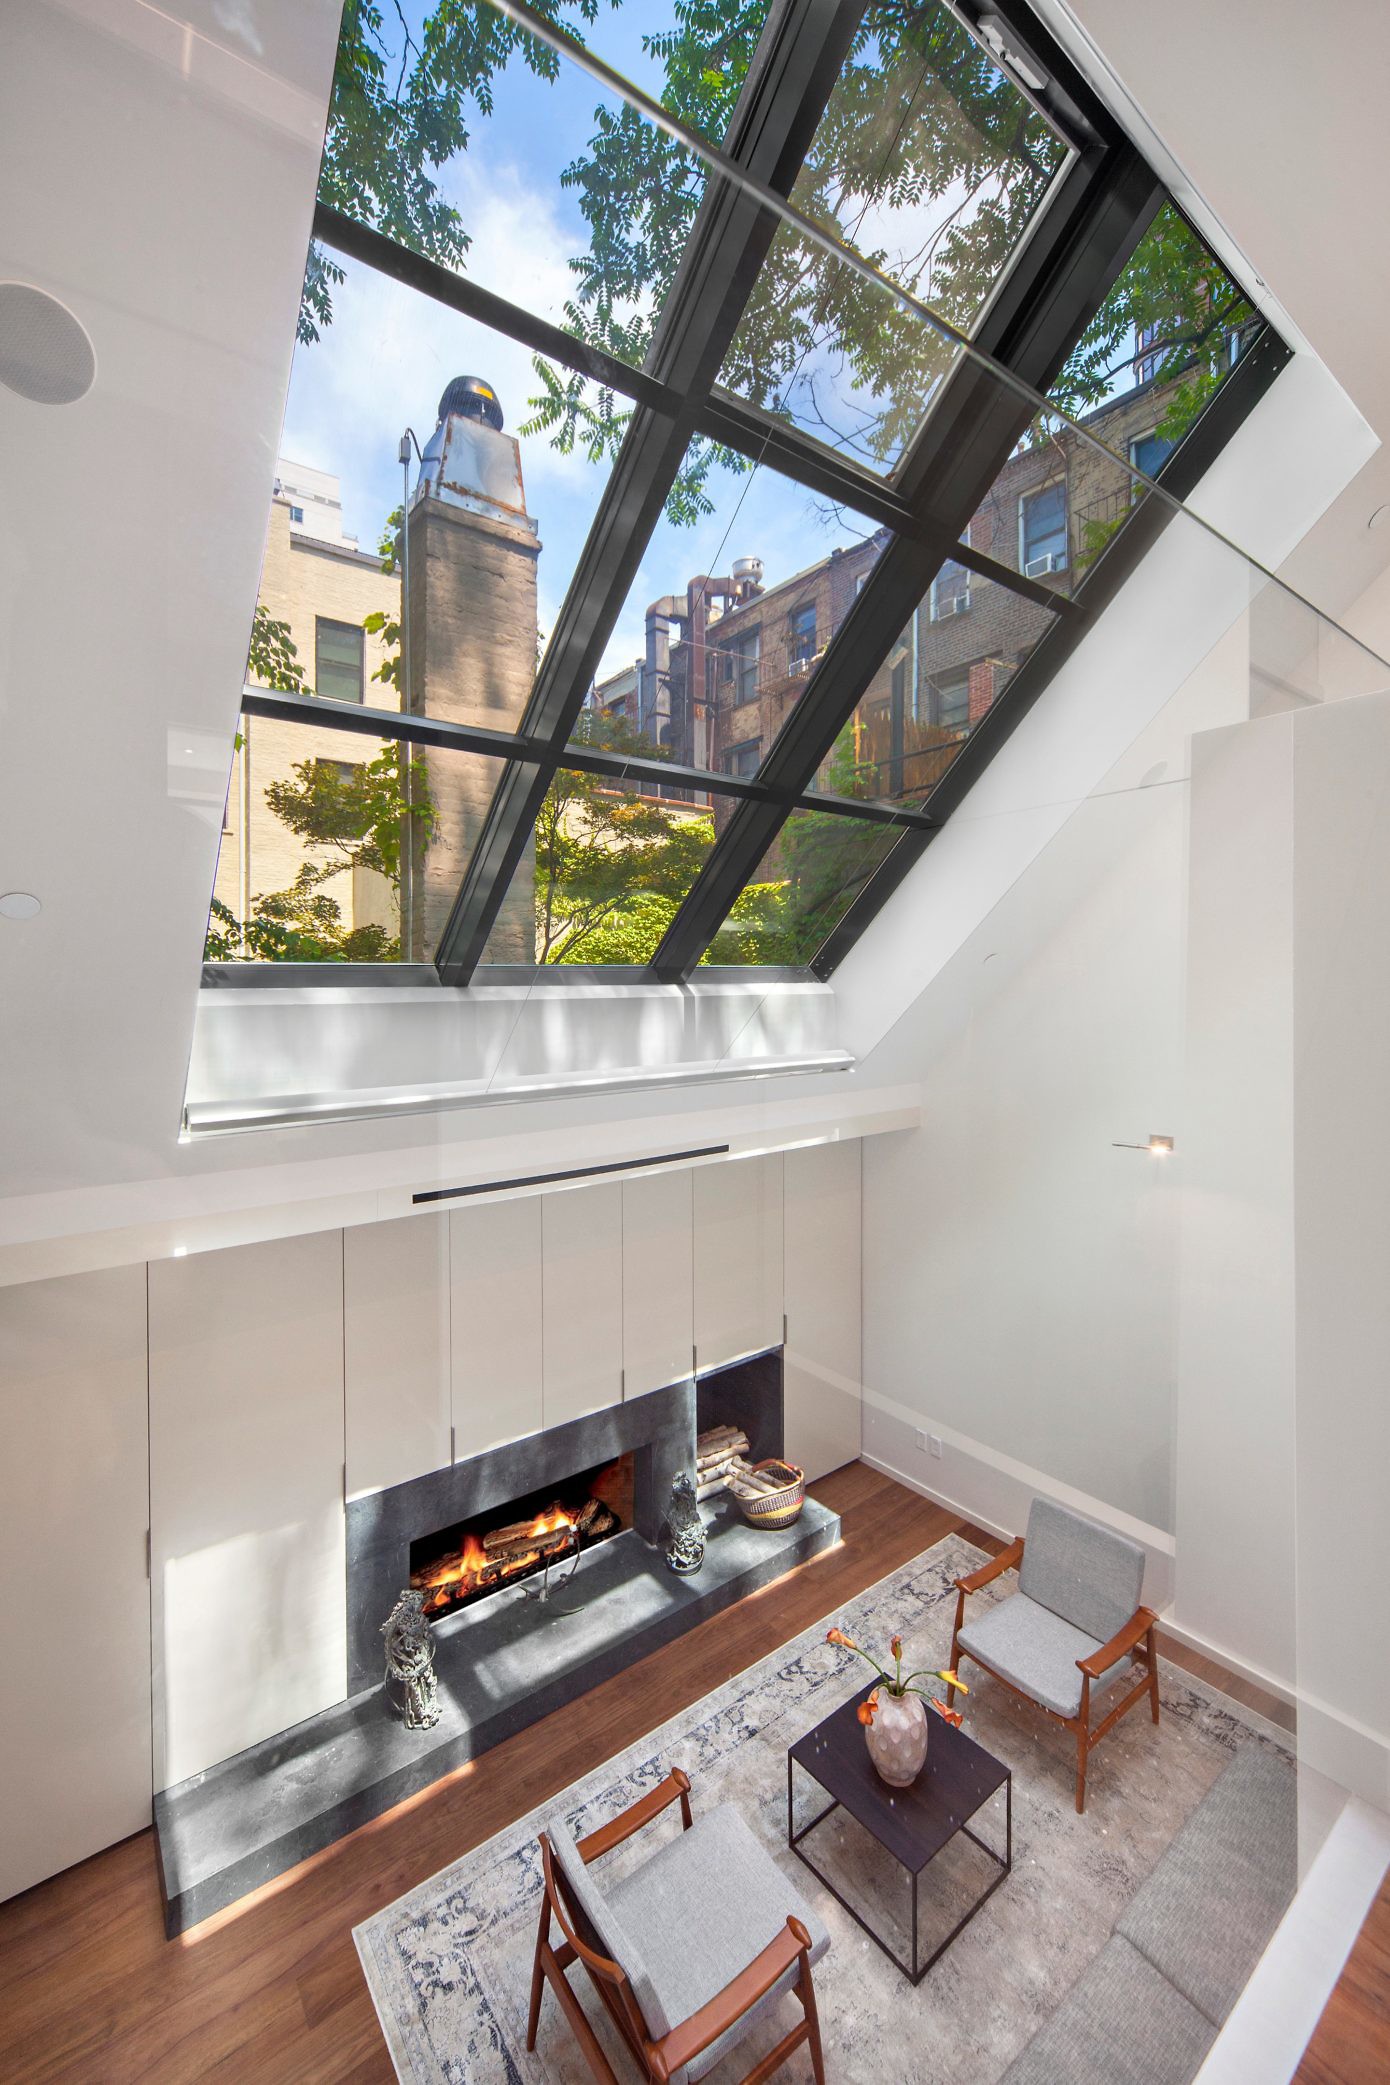 61st Street Townhouse by TRA Studio